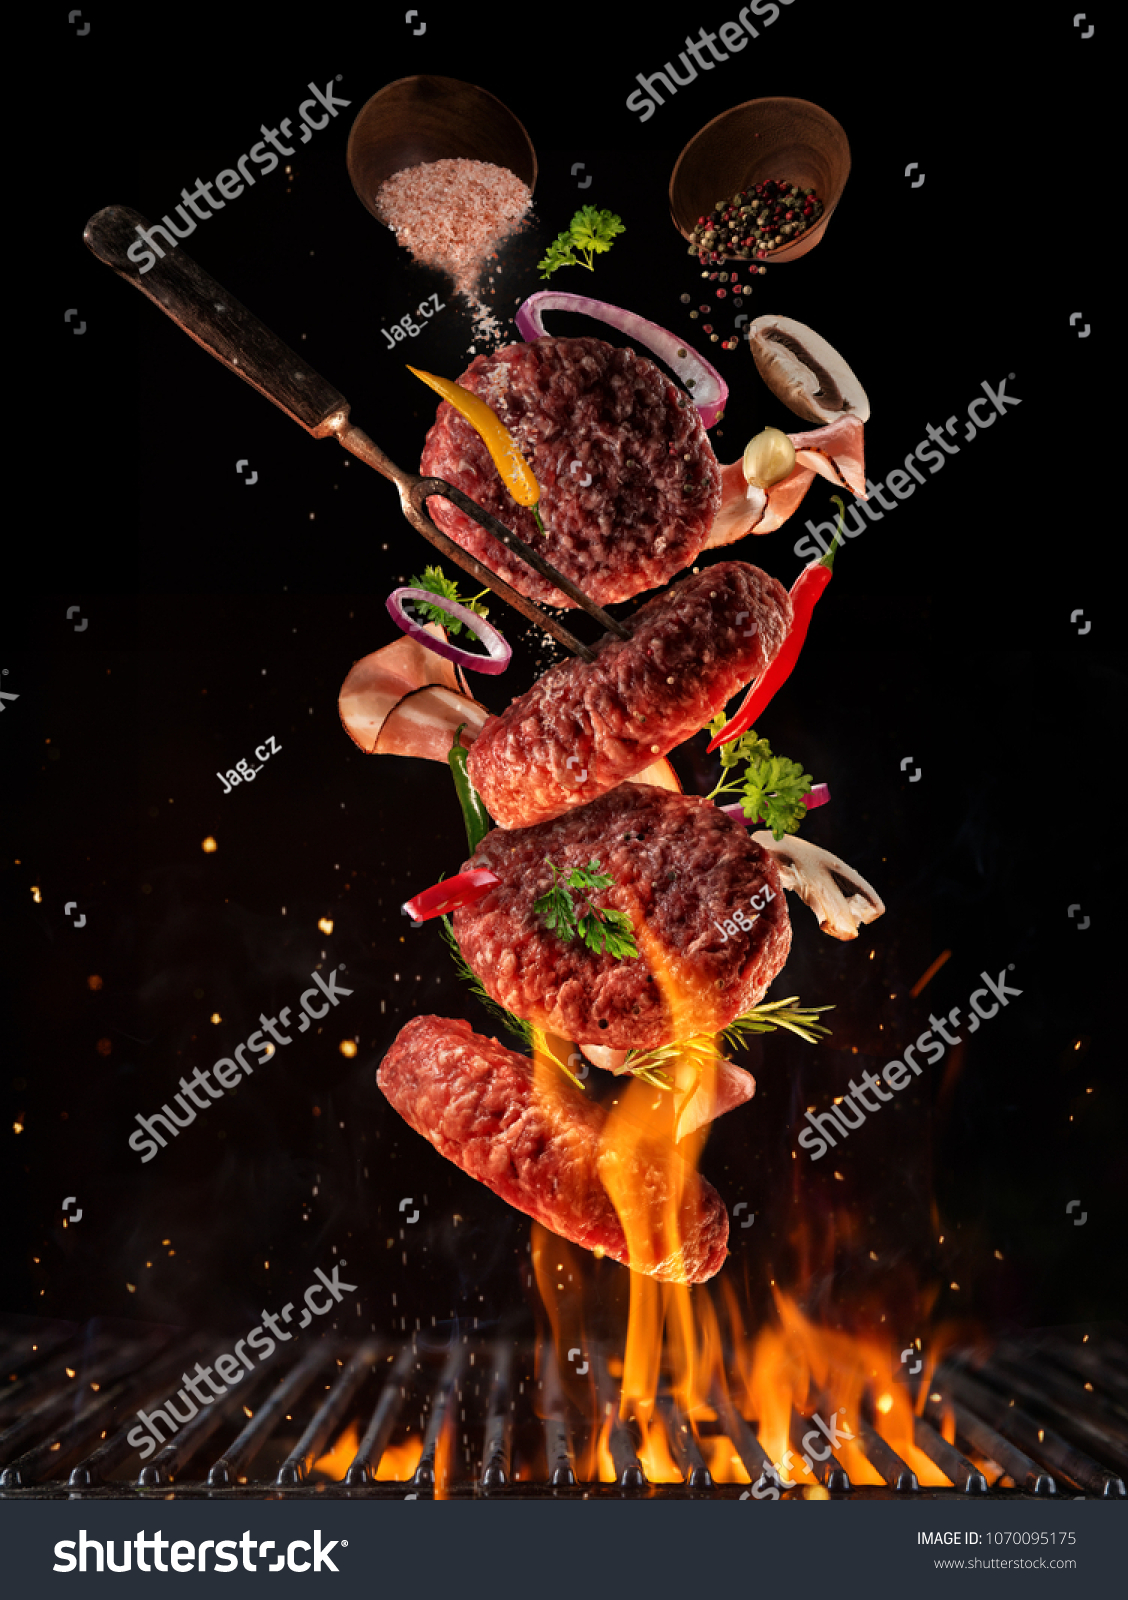 Flying pieces of beef meat pieces on hamburger from grill grid, isolated on black background. Concept of flying food, very high resolution image #1070095175